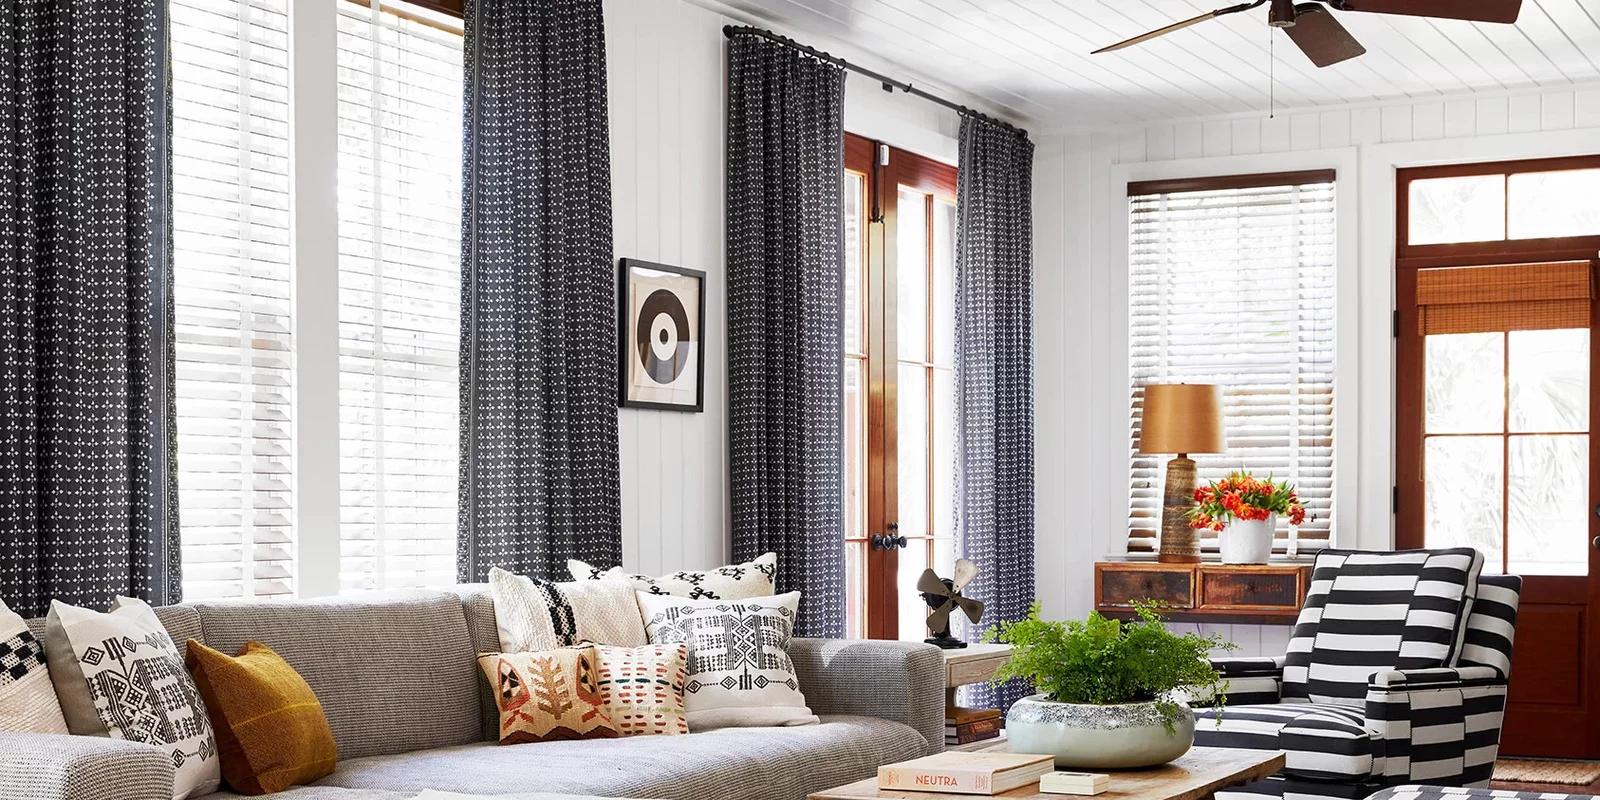 Hang Some Curtains or Blinds in the Apartment 